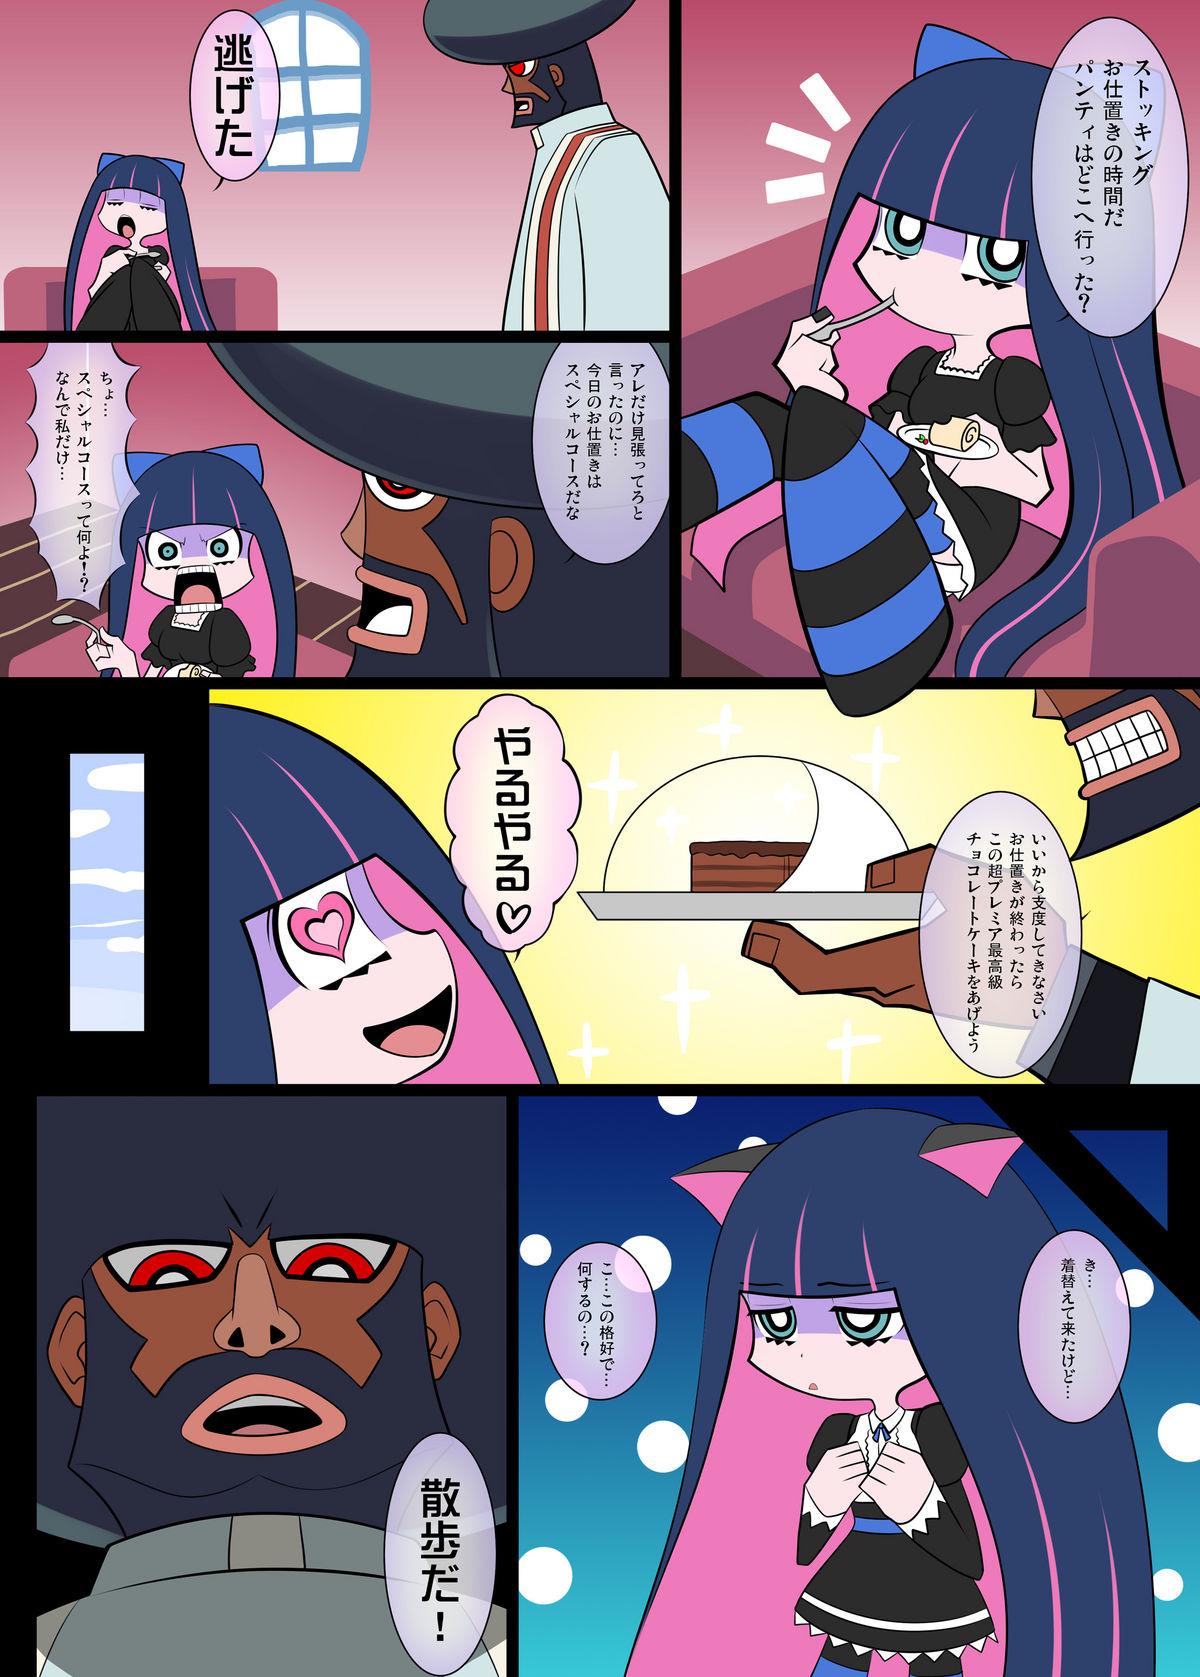 Teen Blowjob Sperma & Sweets with Villager - Panty and stocking with garterbelt Str8 - Page 3